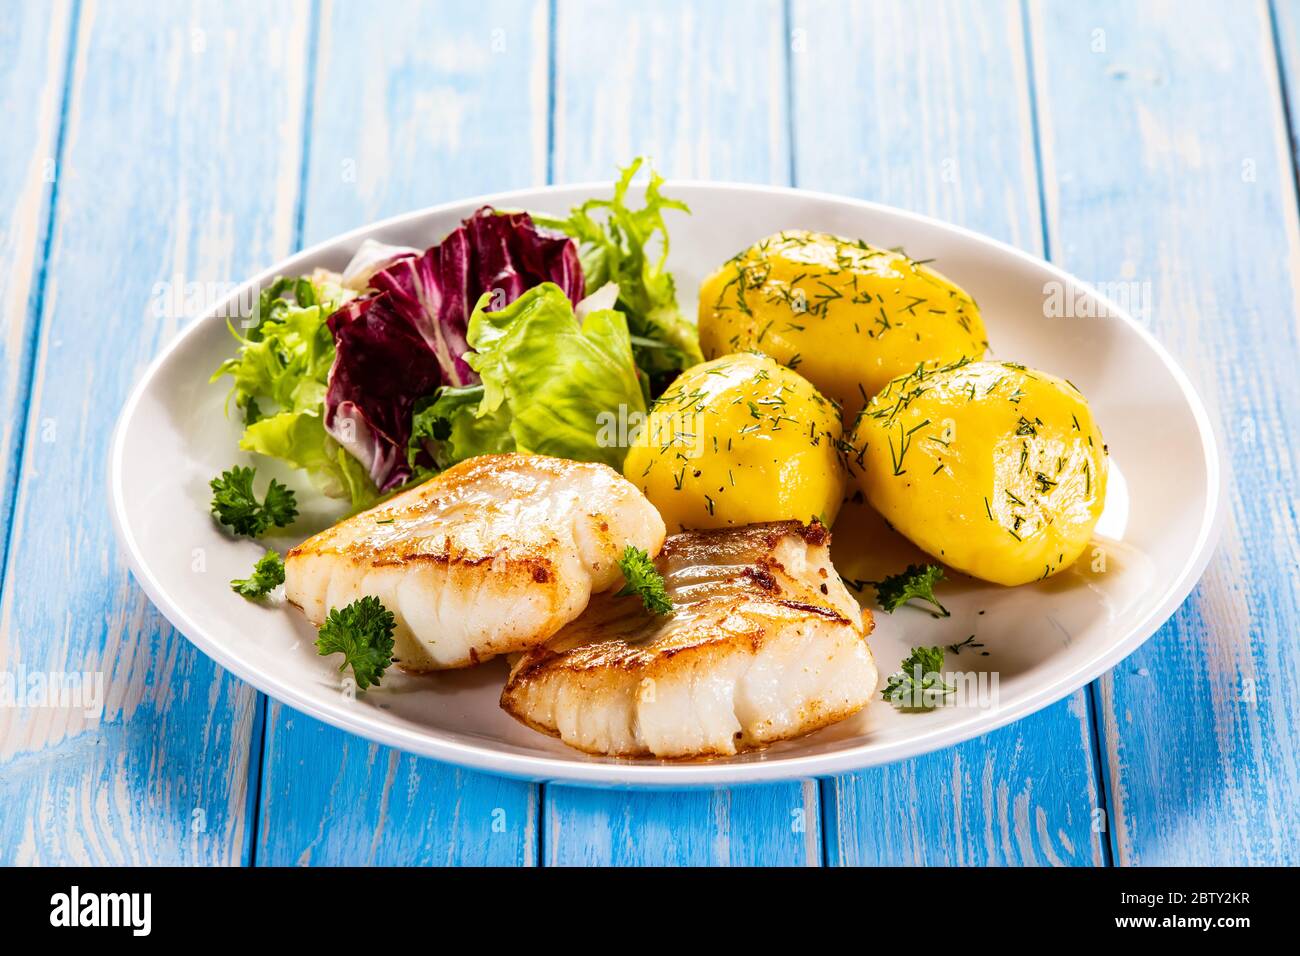 Fried fish with potatoes and vegetable salad on wooden table Stock Photo